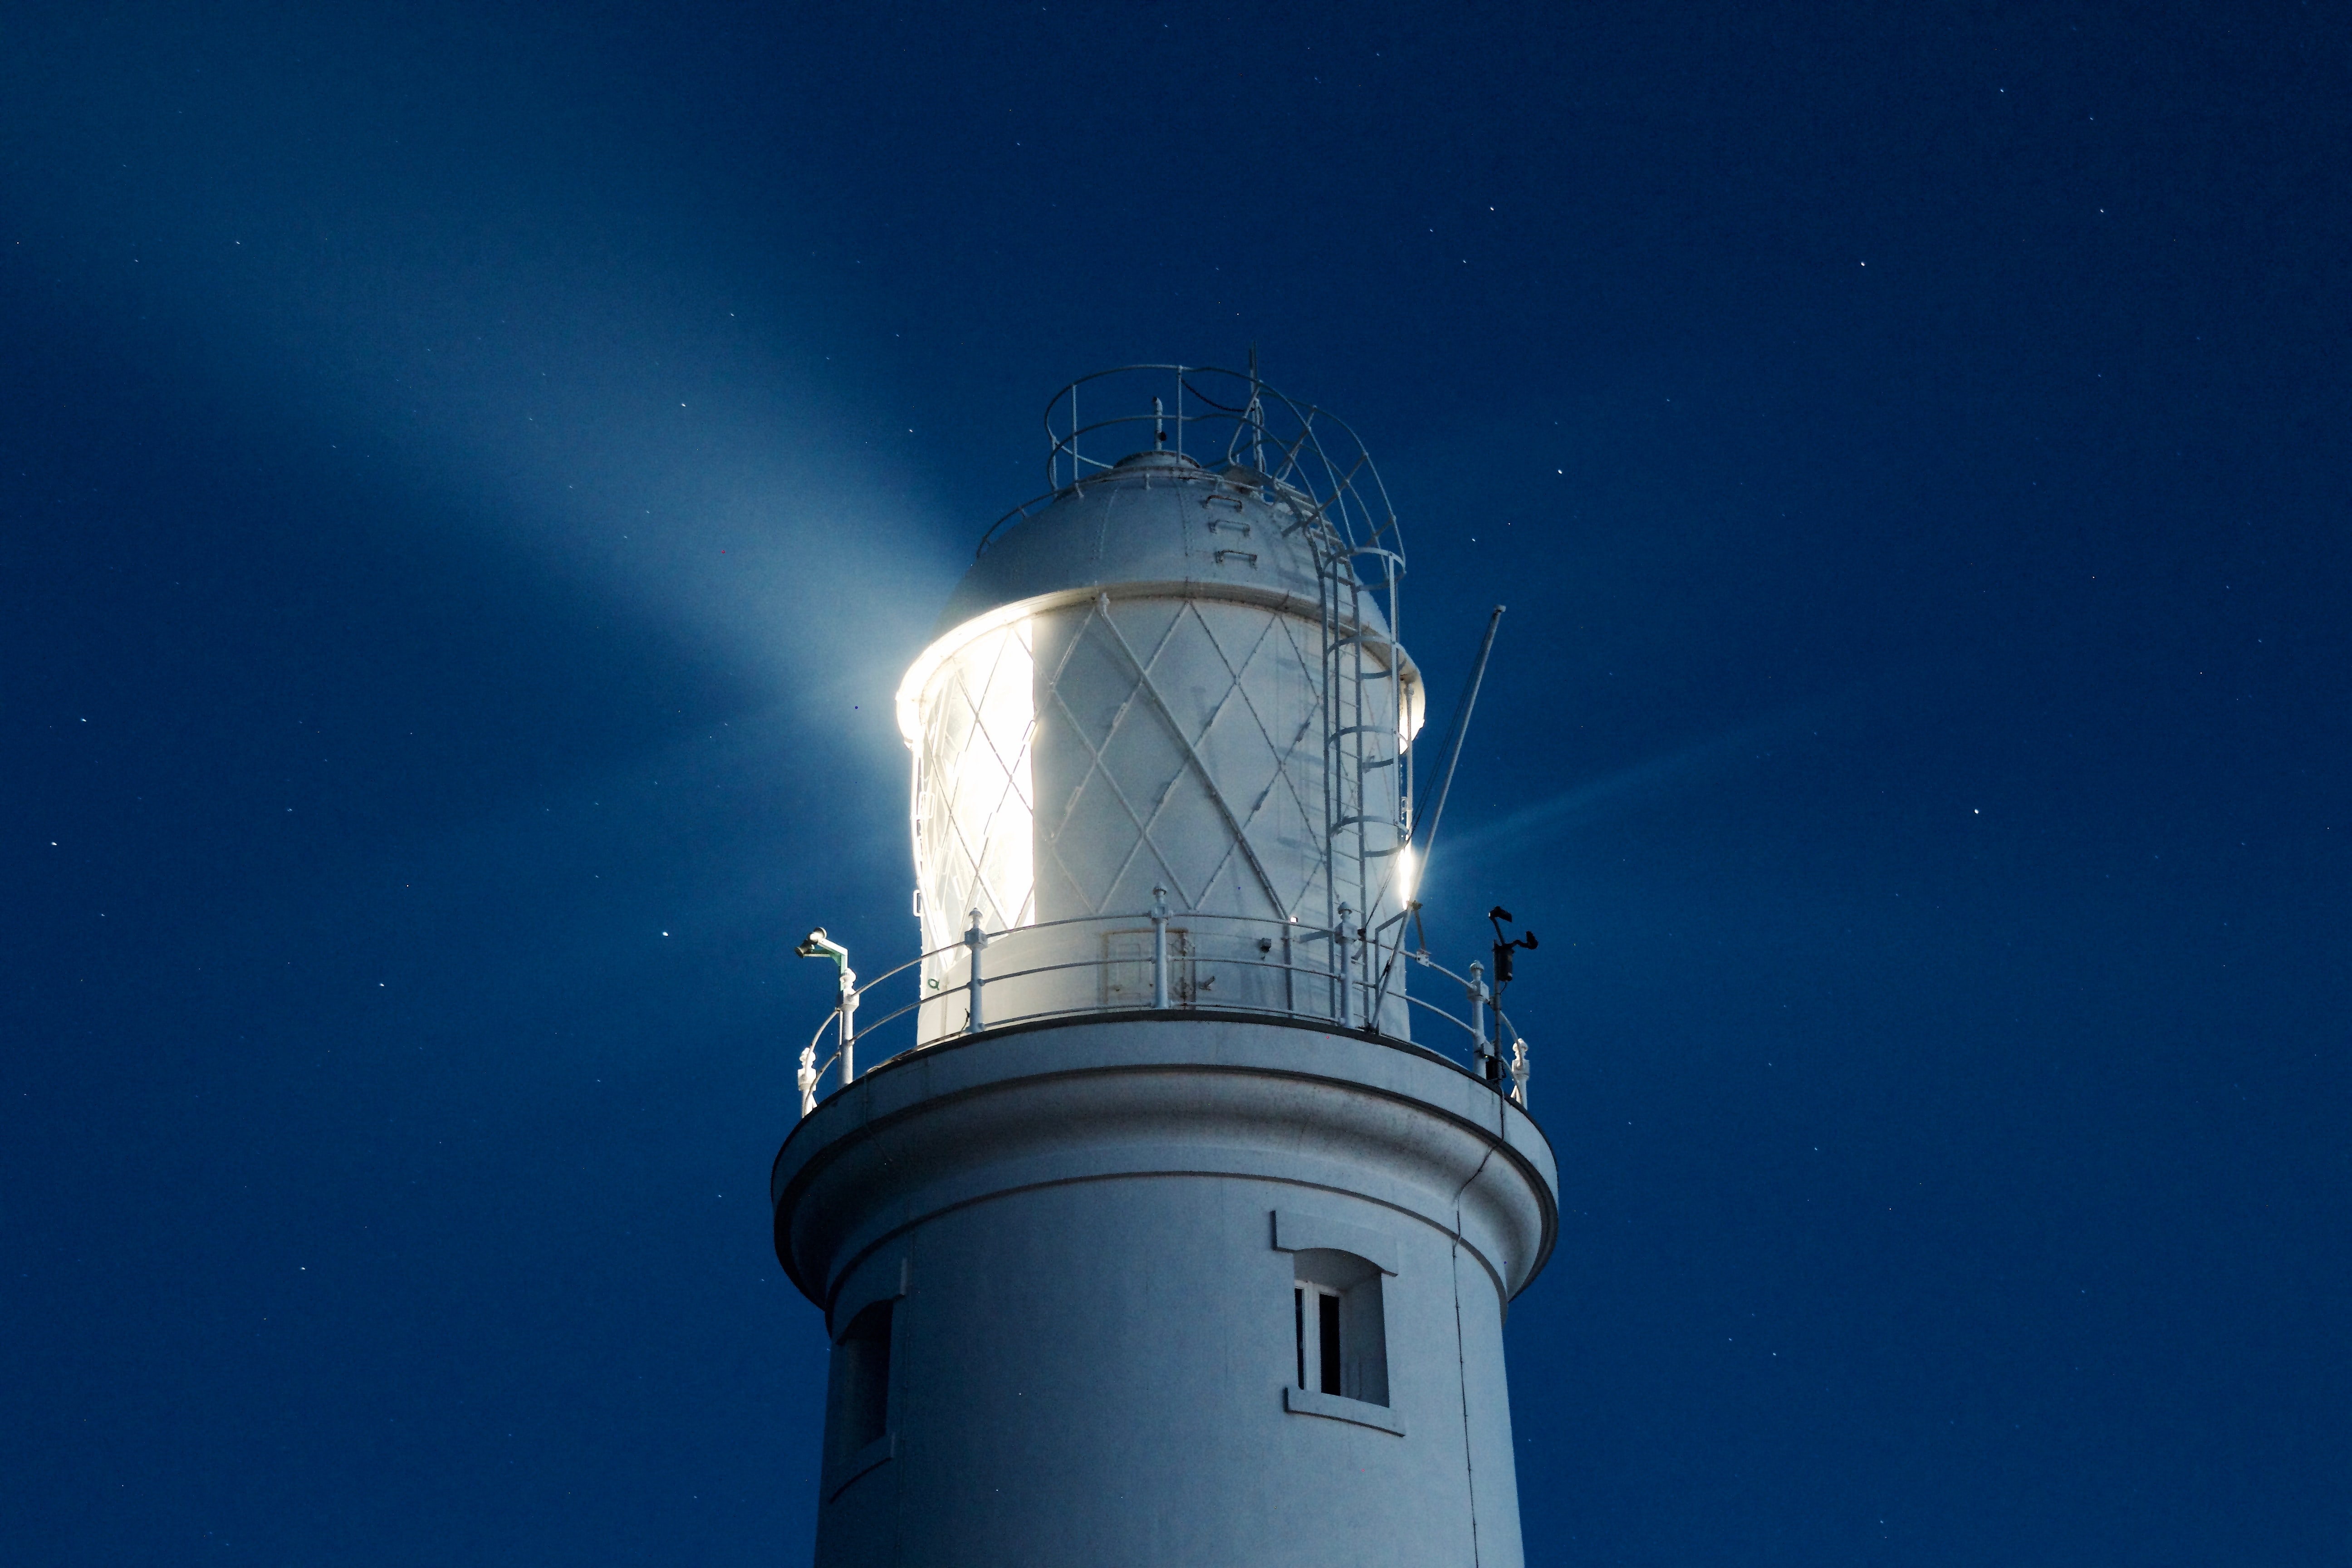 A lighthouse at night, sending out a signal